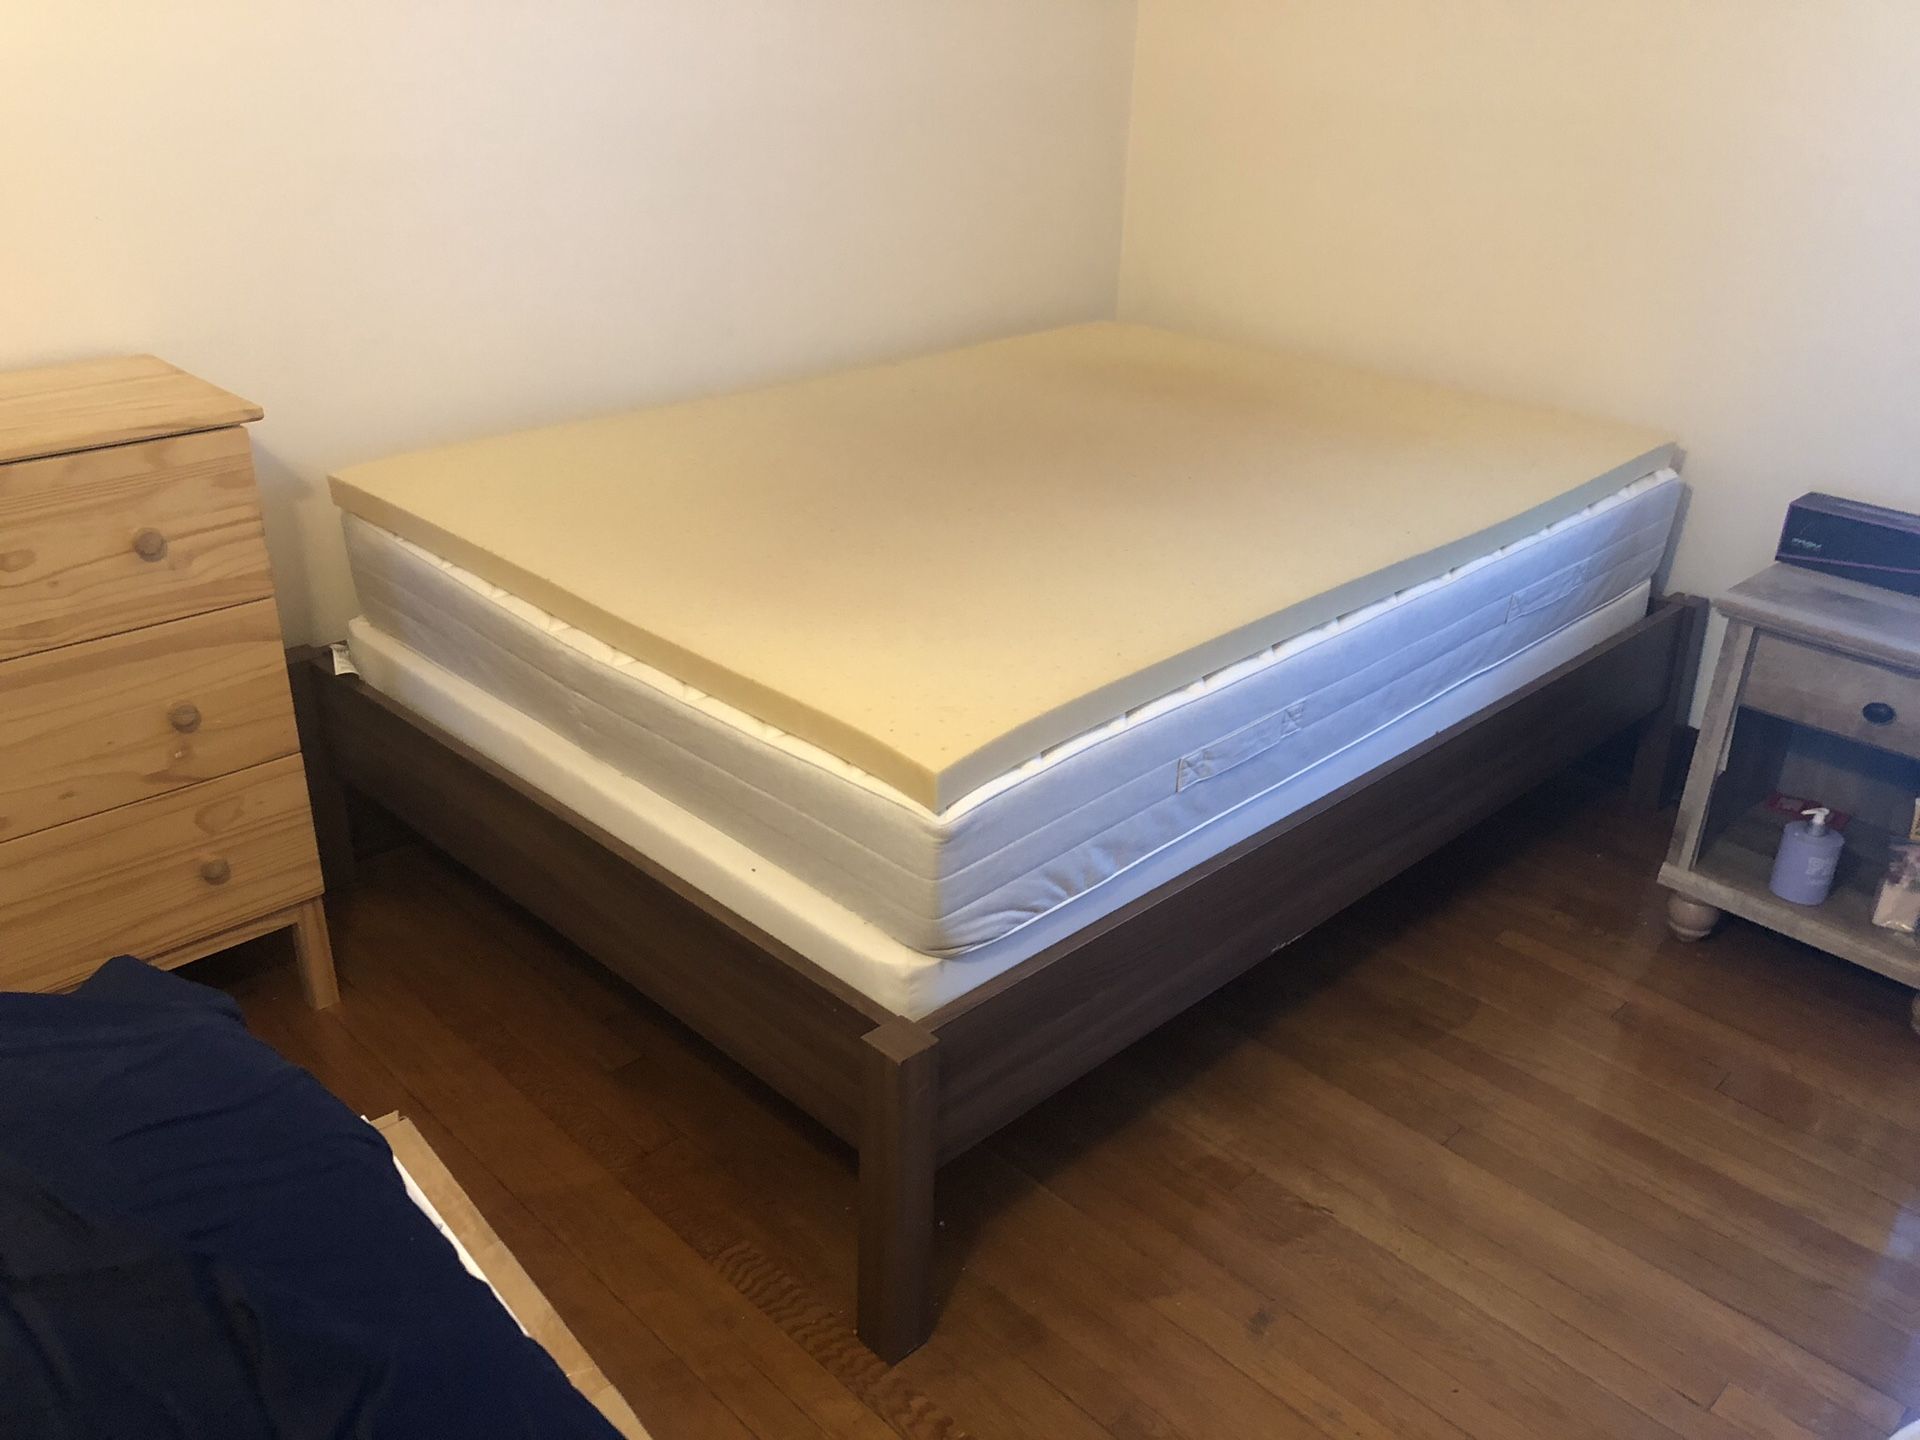 IKEA full-sized bed, excellent condition—$300 OBO